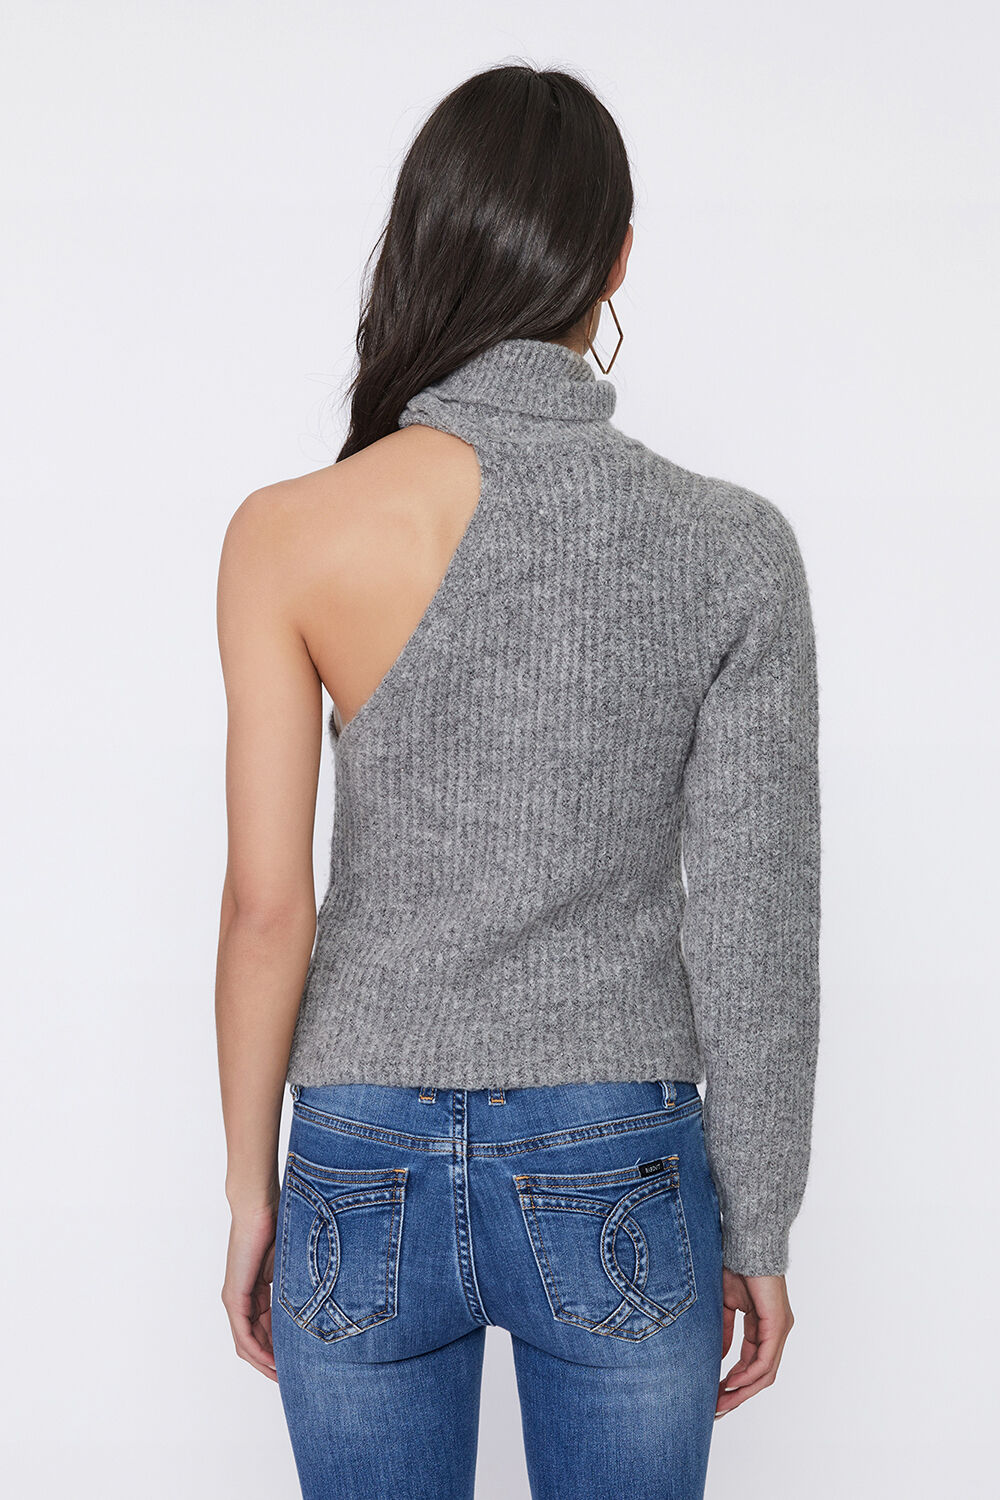 KALI ONE SHOULDER KNIT in colour SMOKED PEARL